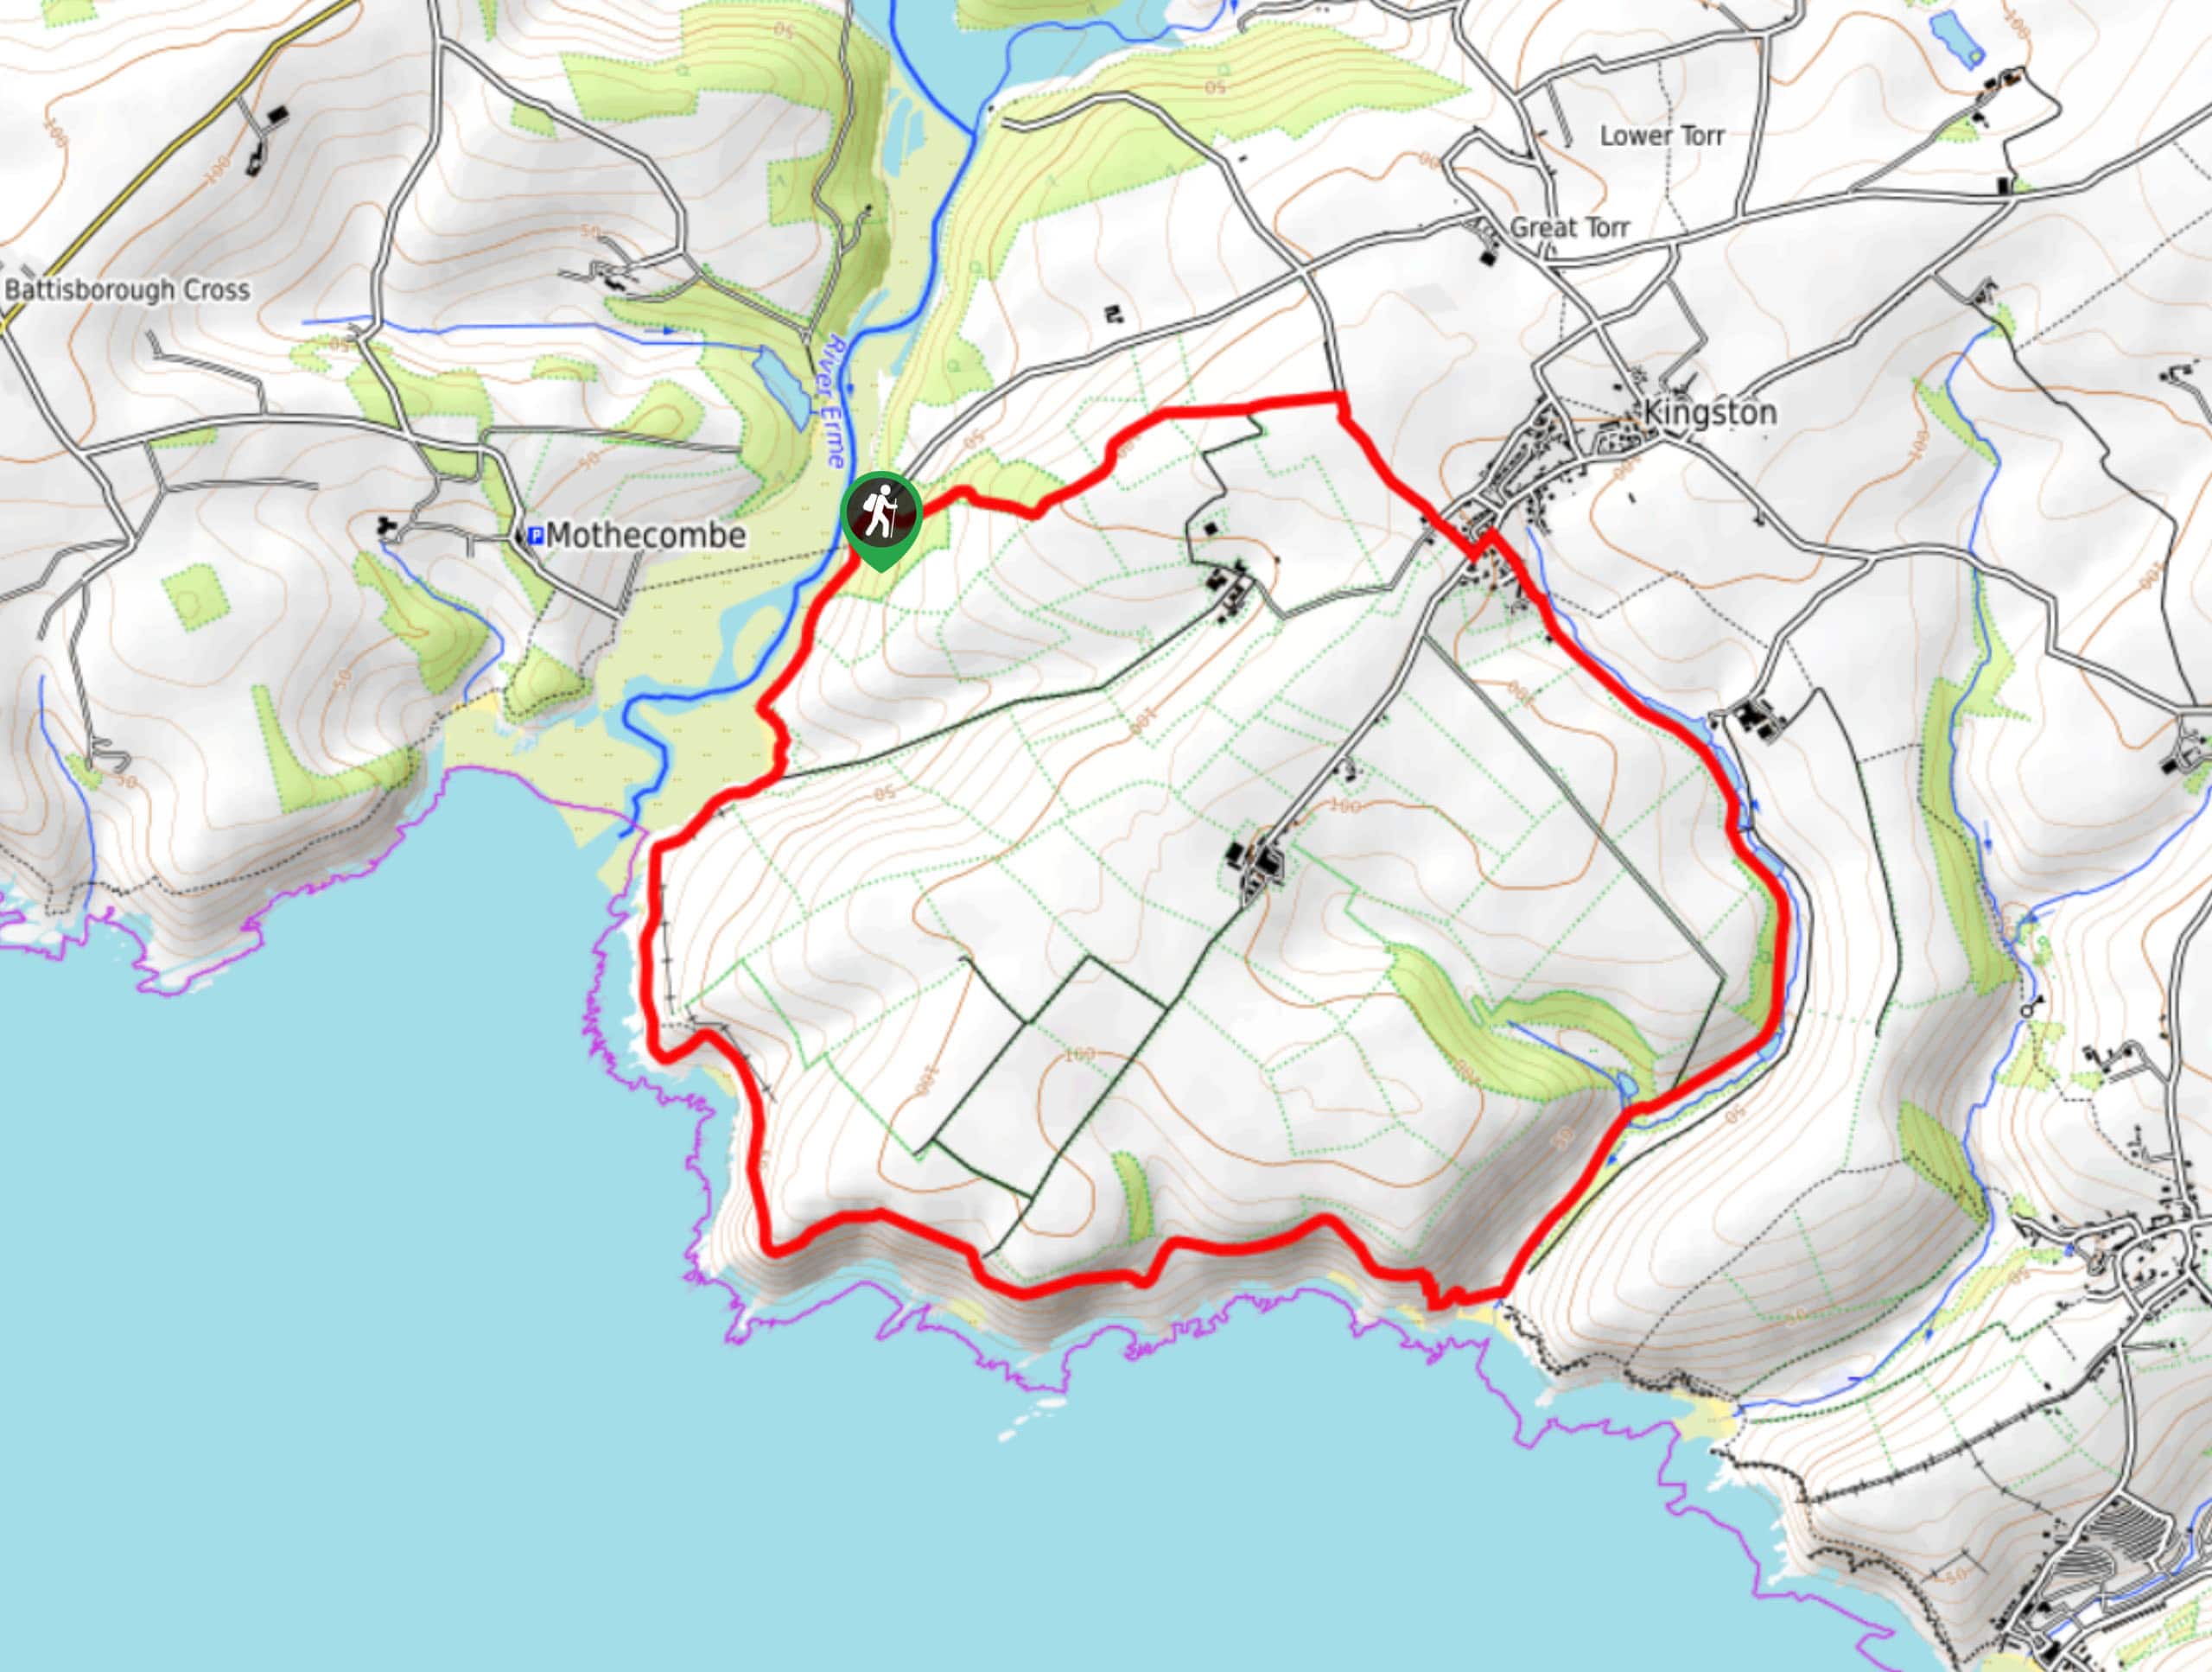 River Erme, Middlecombe Beach, and Kingston Circular Walk Map